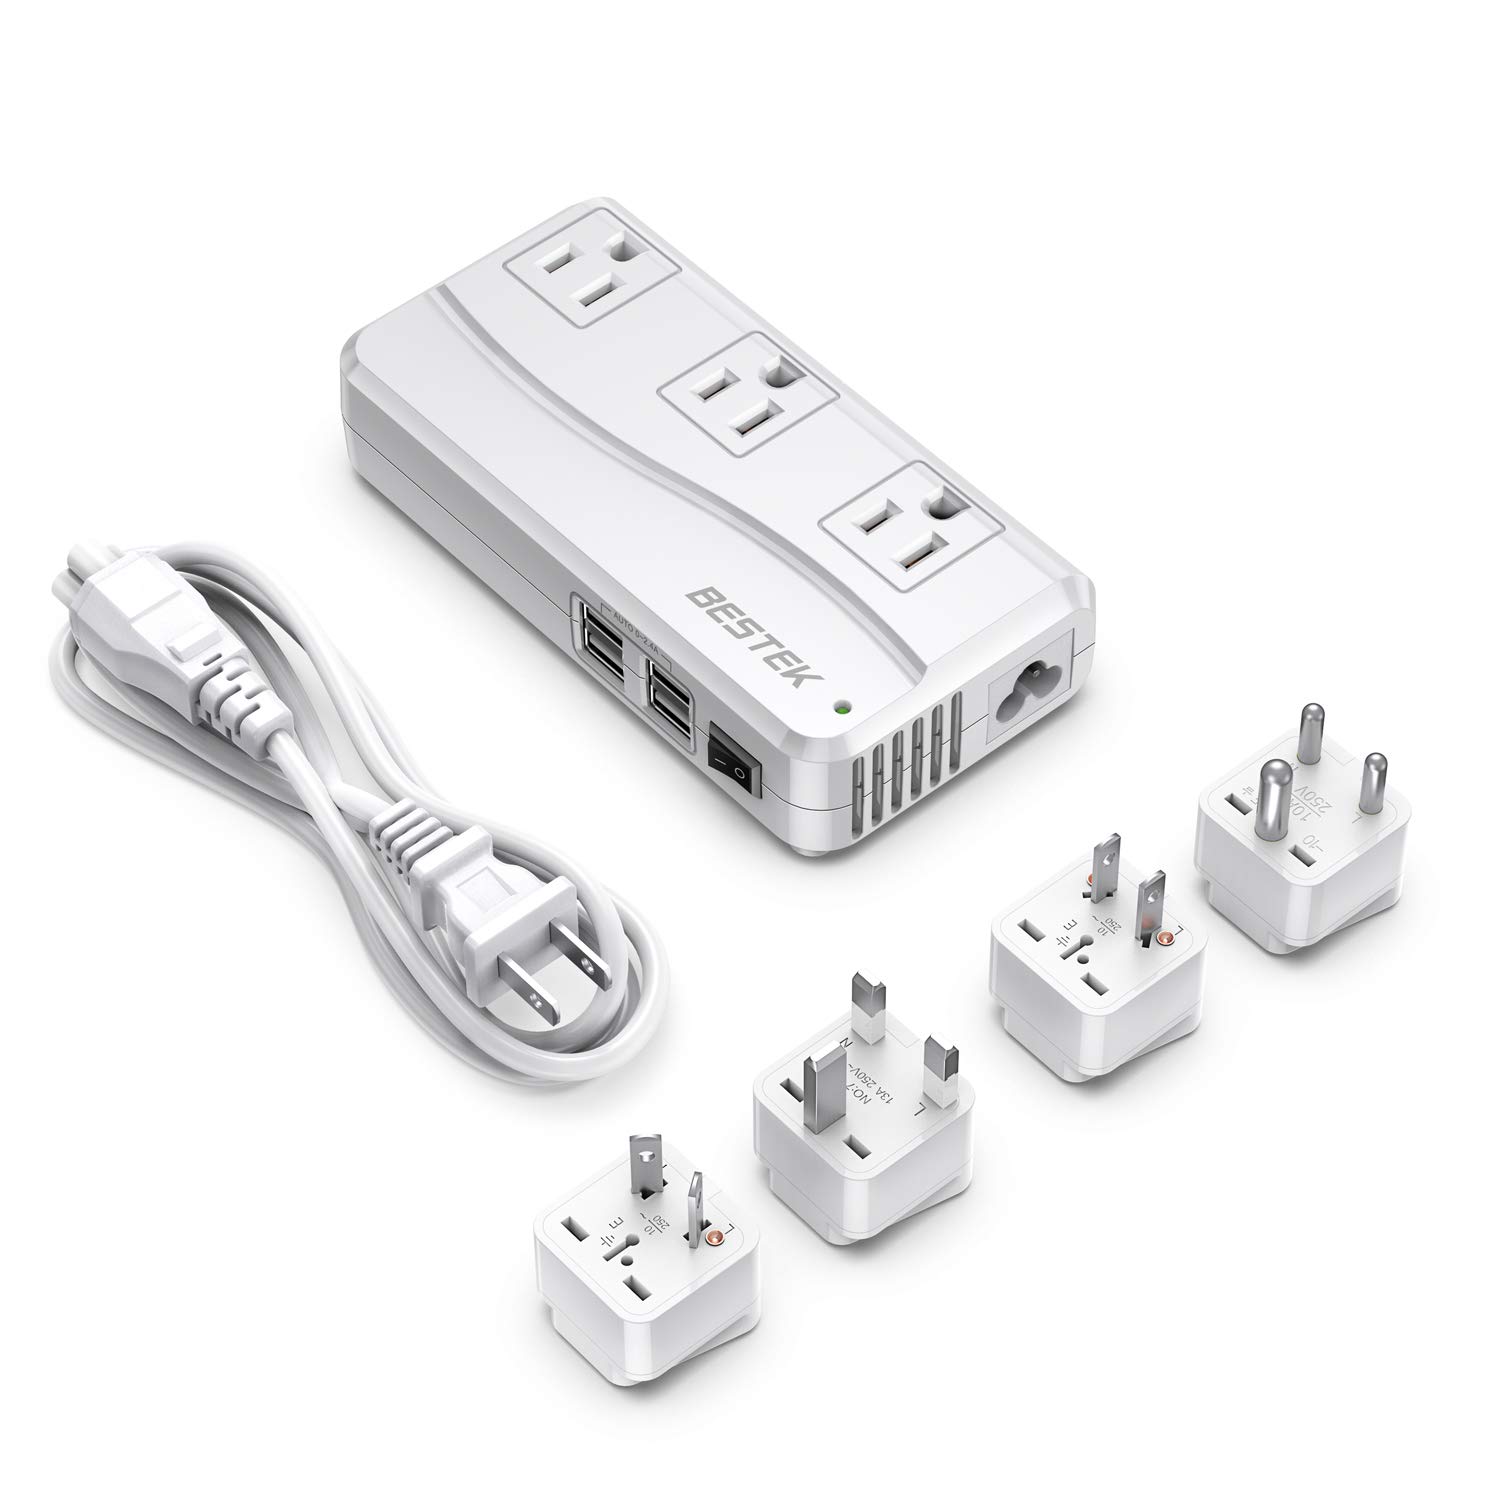 BESTEK Universal Travel Adapter, Worldwide Plug Adapter 220V to 110V Voltage Converter with 6A 4-Port USB Charging and UK/in/AU/US International Outlet Adapter(White)